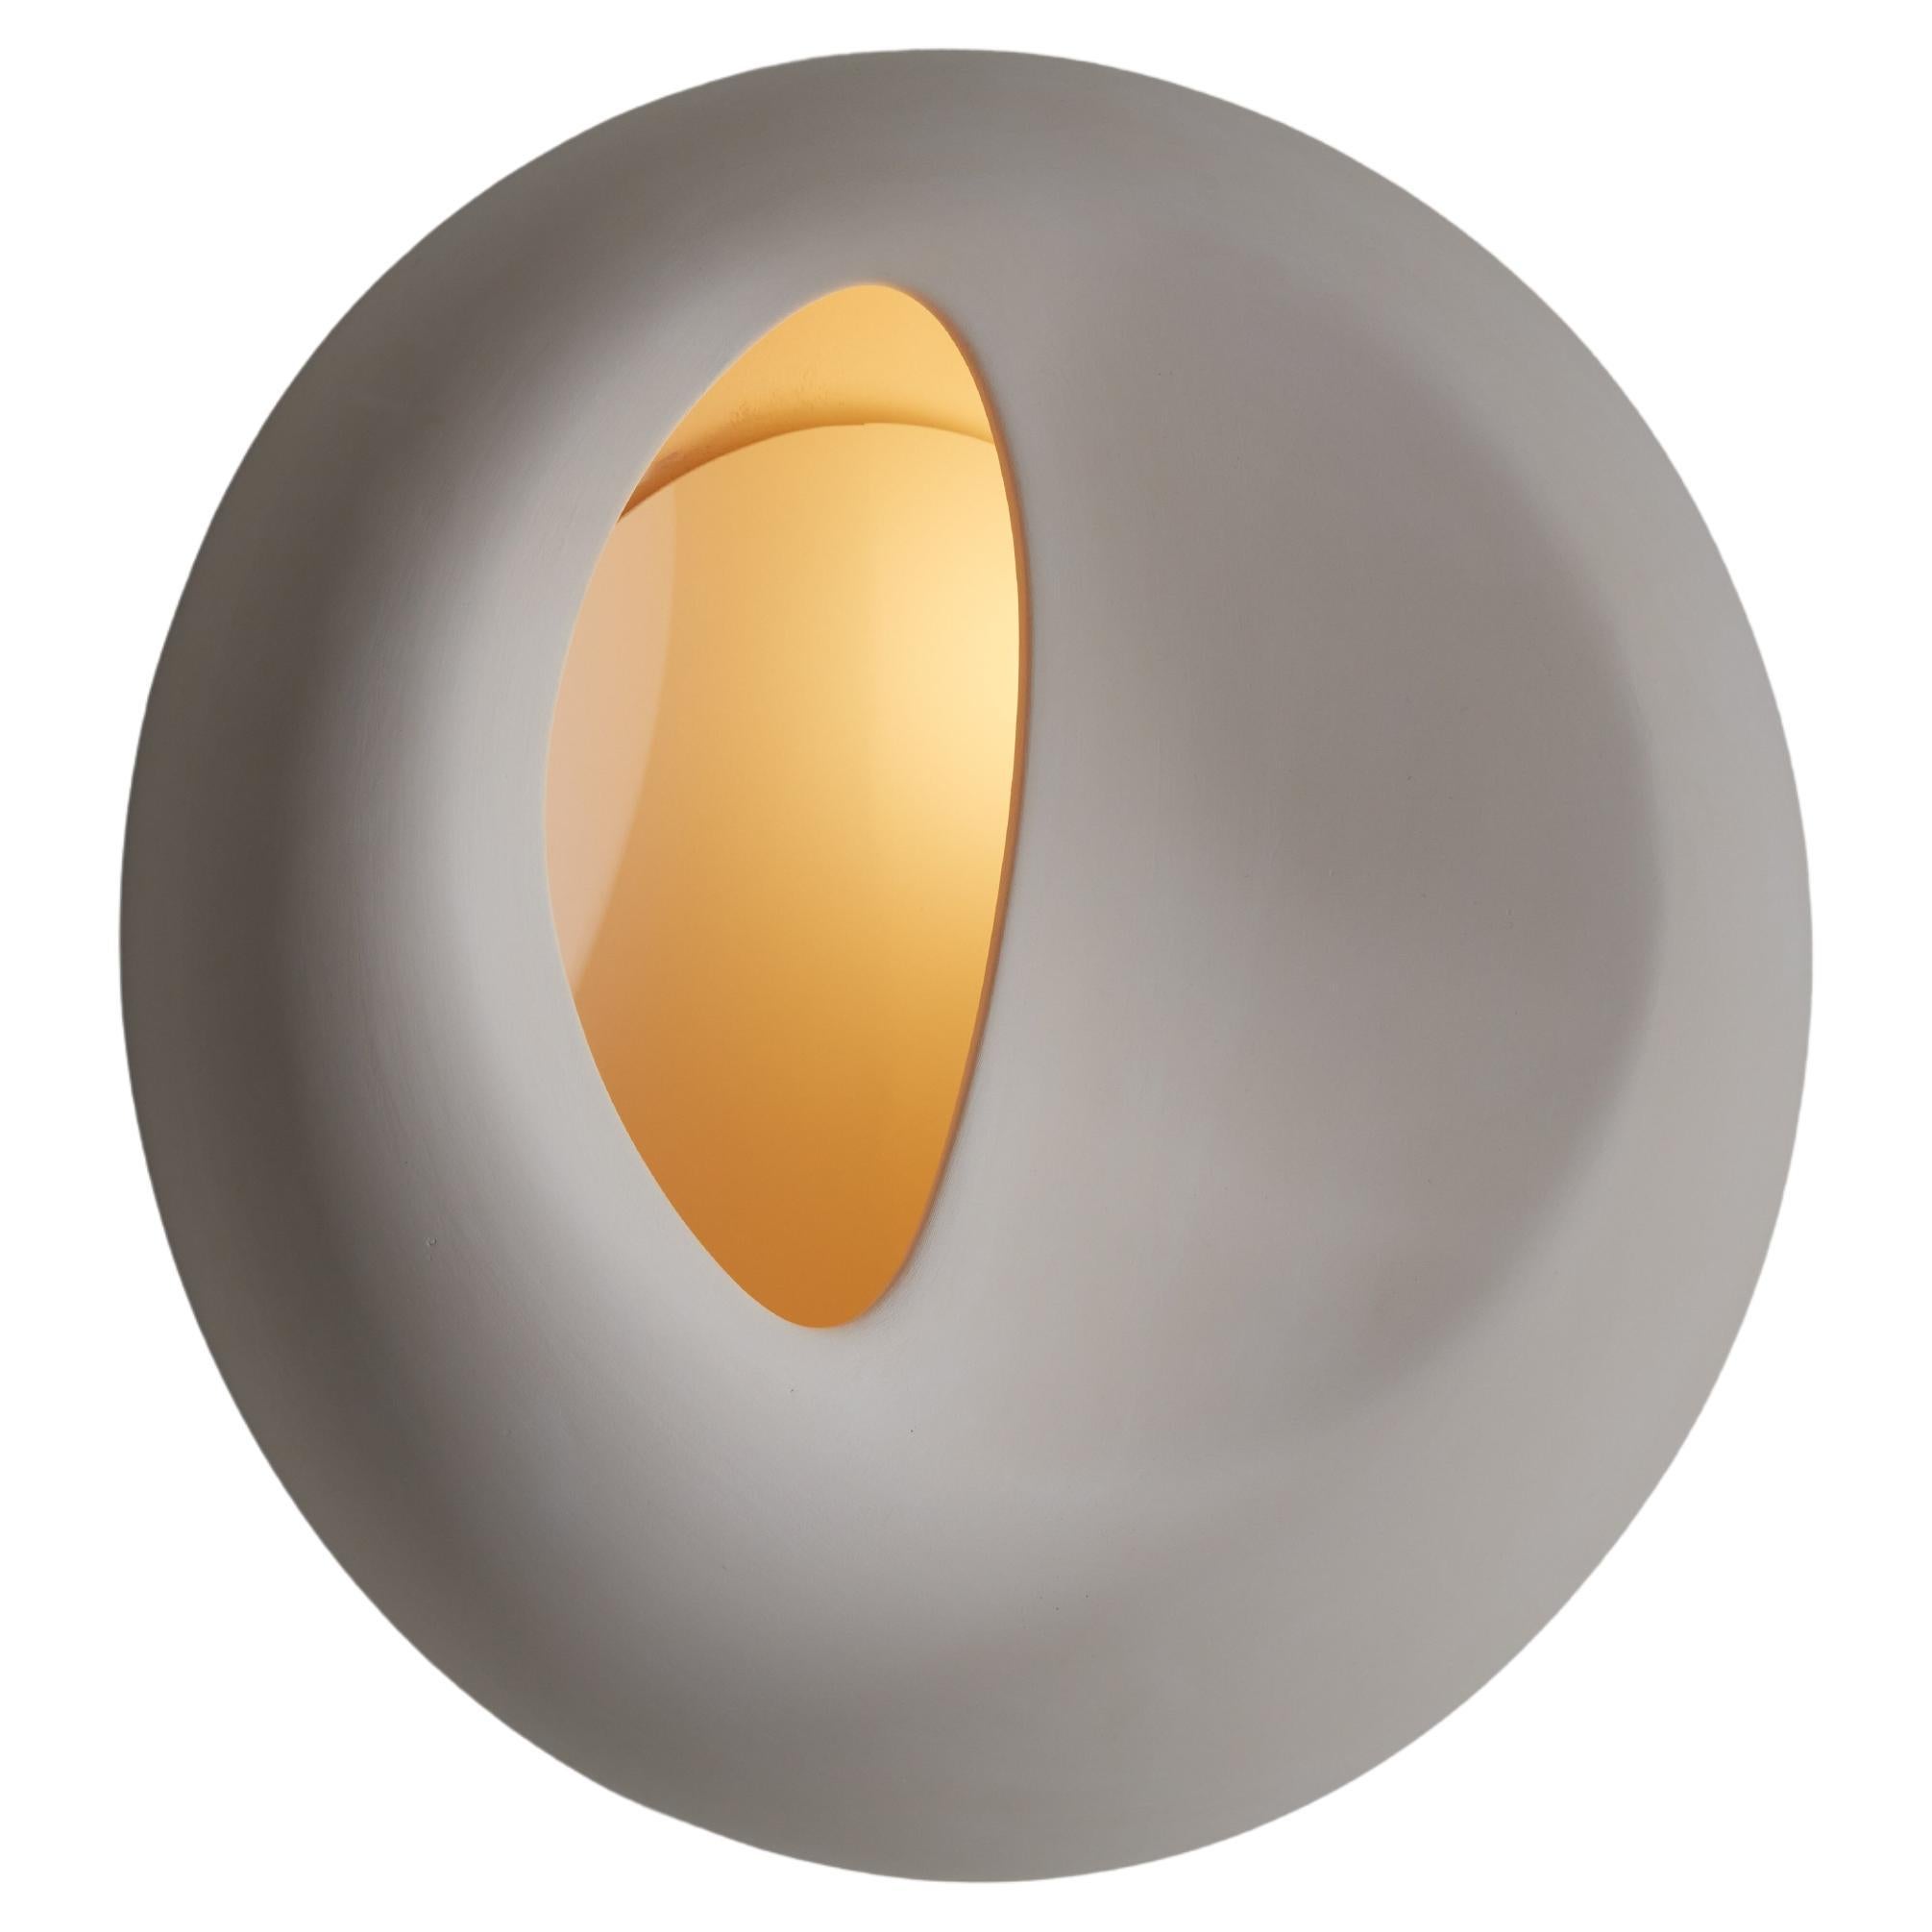 Merveilleux Wall Lamp by Mydriaz For Sale